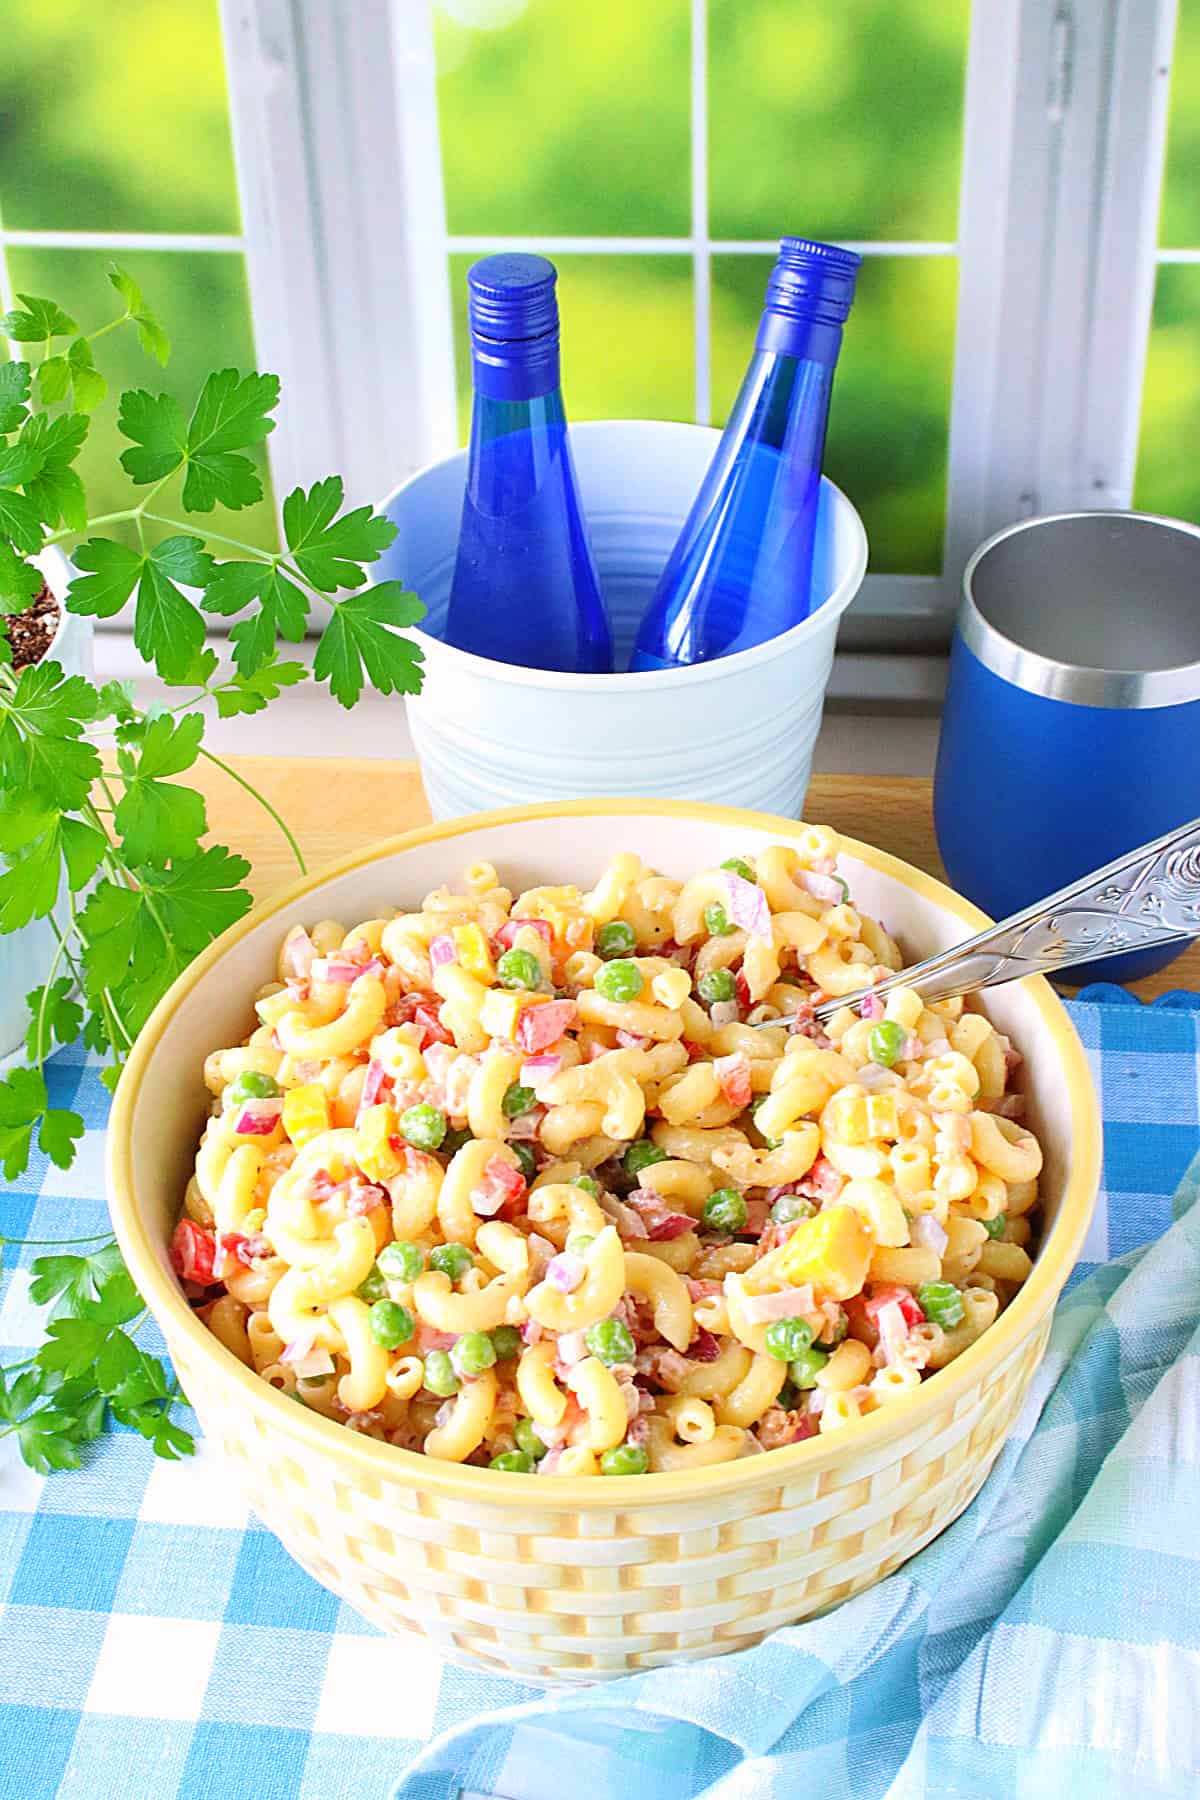 A vibrant photo of a bowl of chilled Macaroni and Pea Salad on a blue and white checked tablecloth.